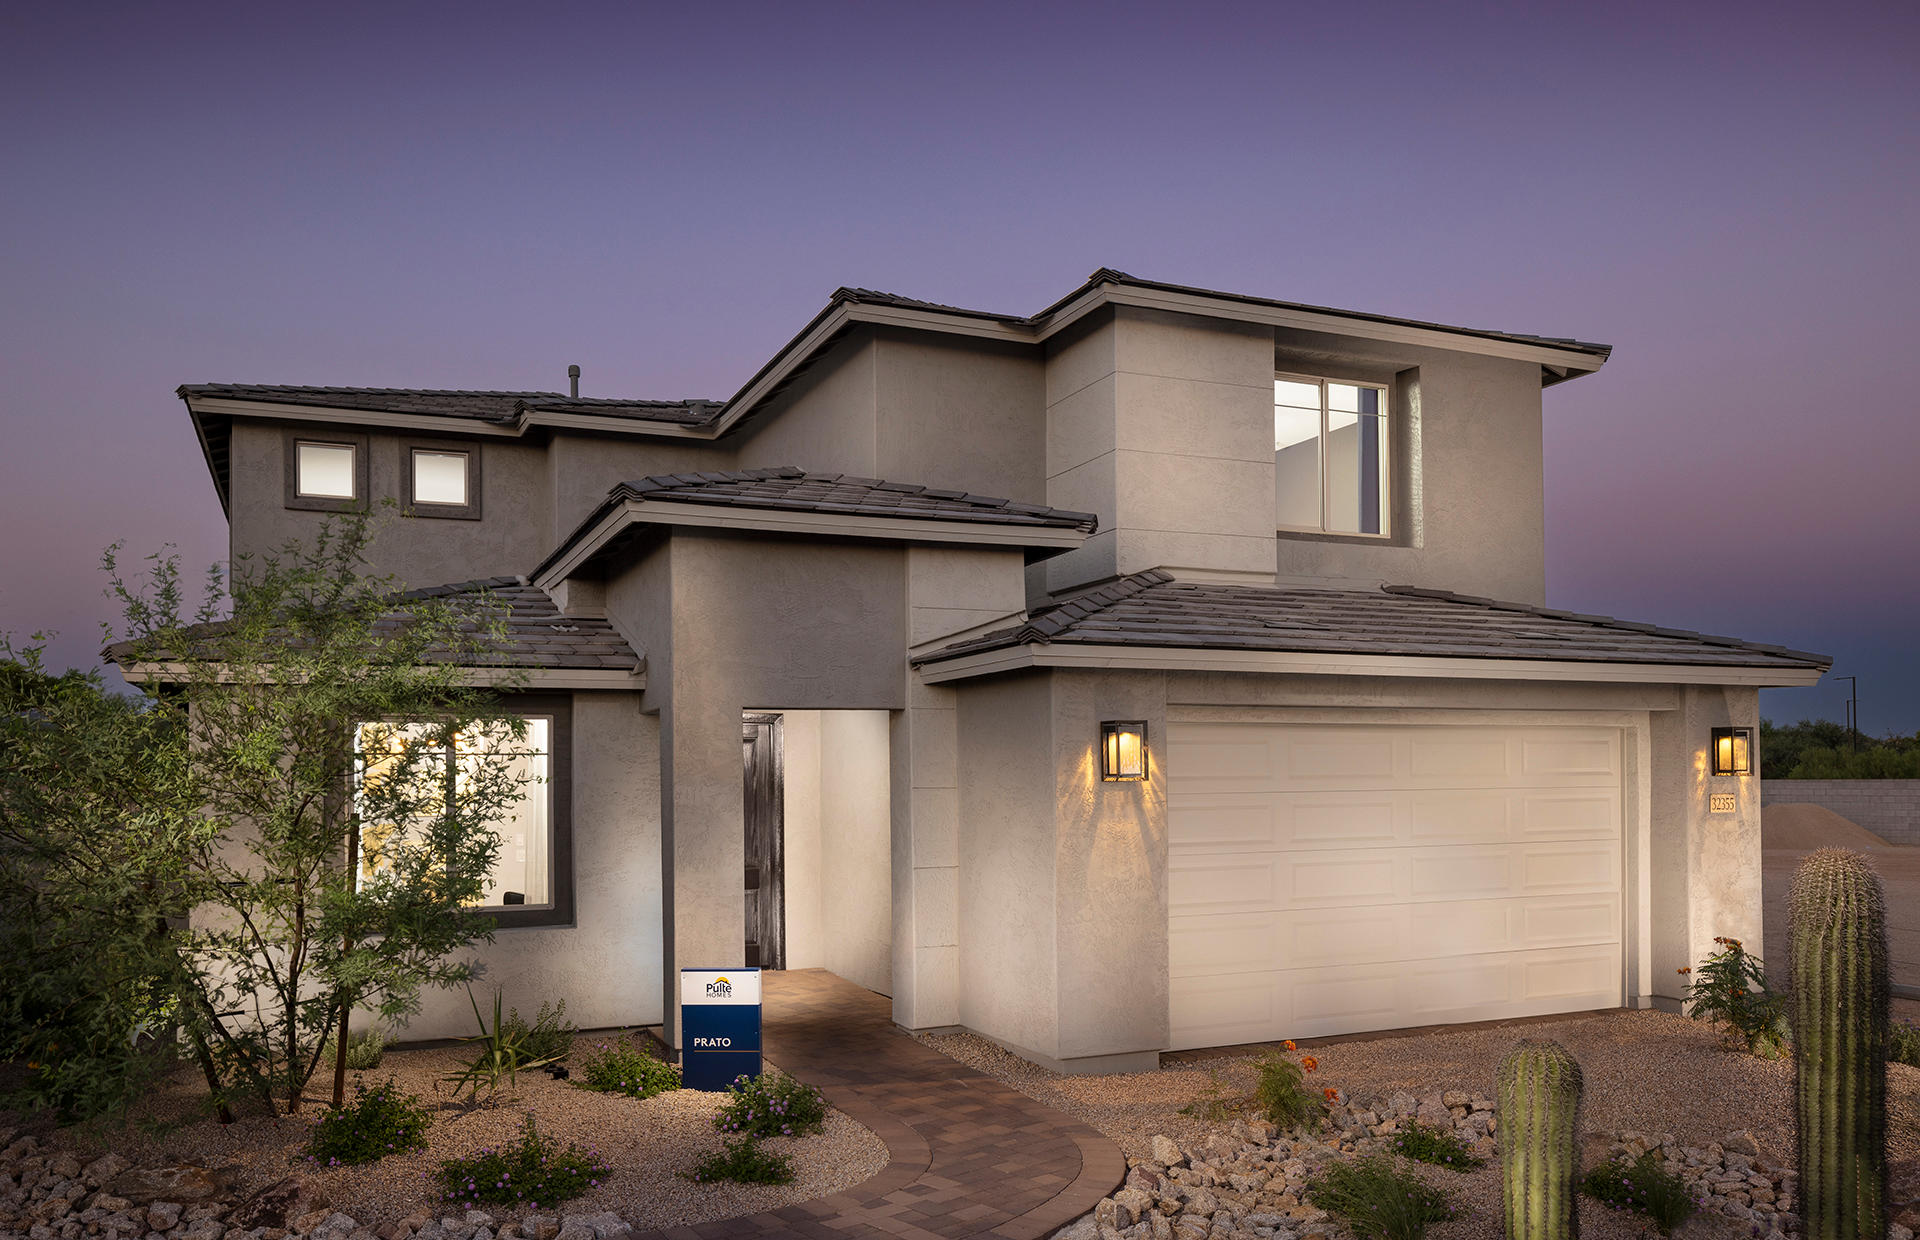 New Homes For Sale in Phoenix